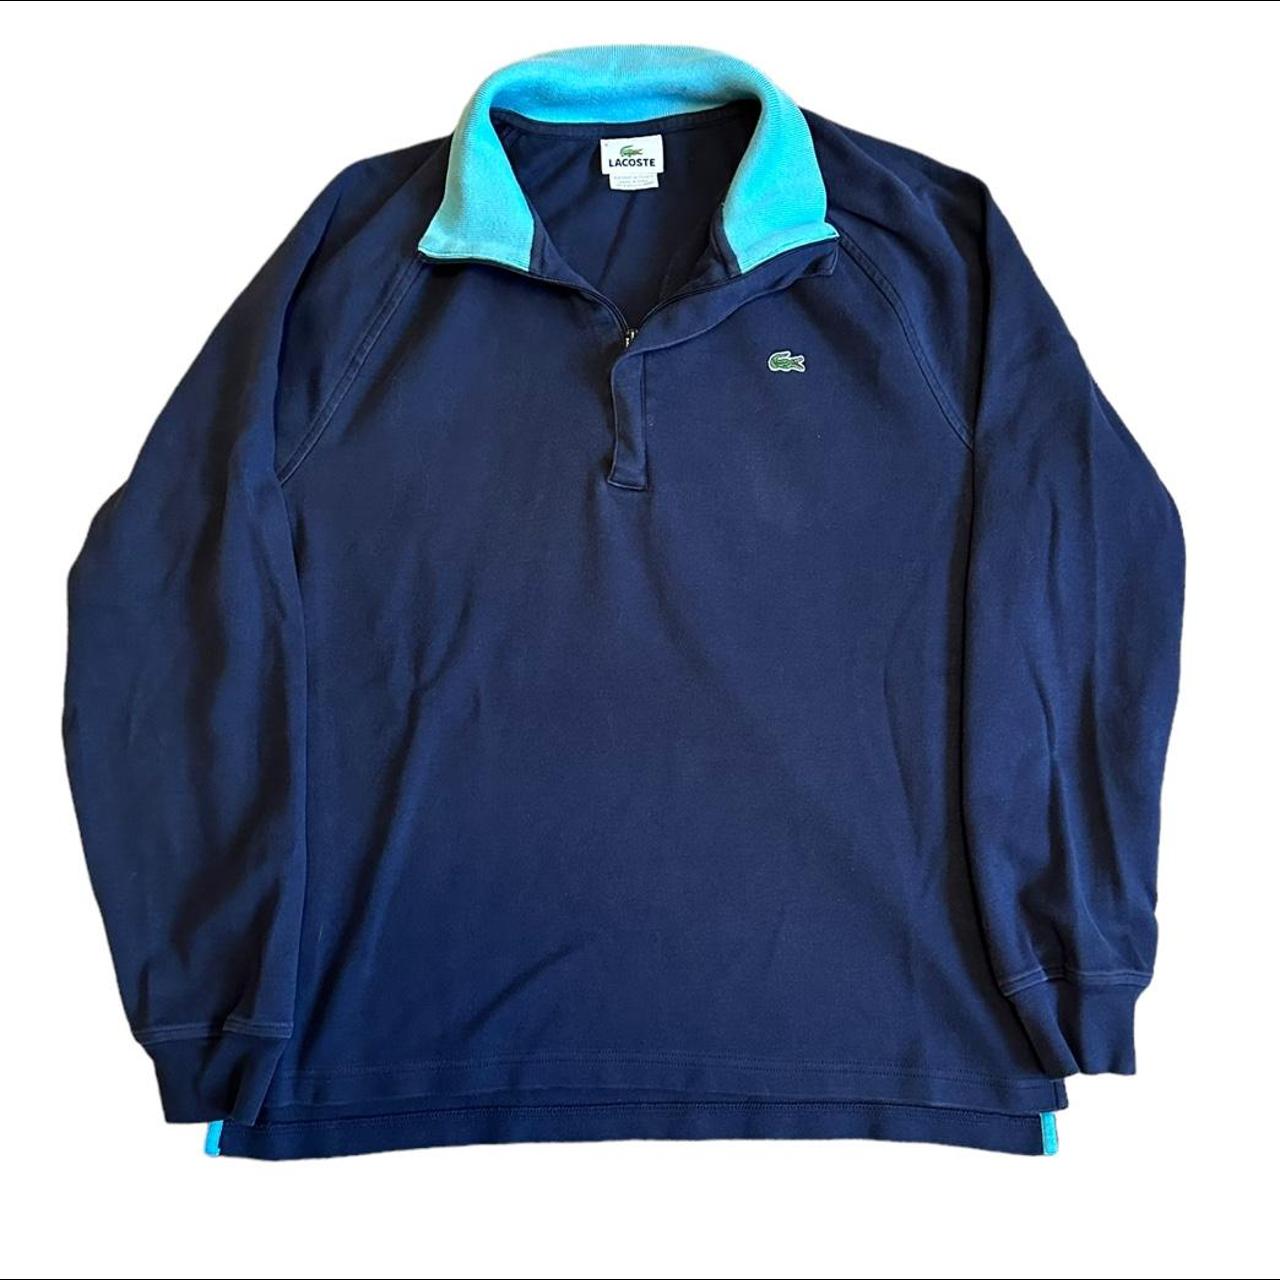 Lacoste Men's Navy and Blue Jumper